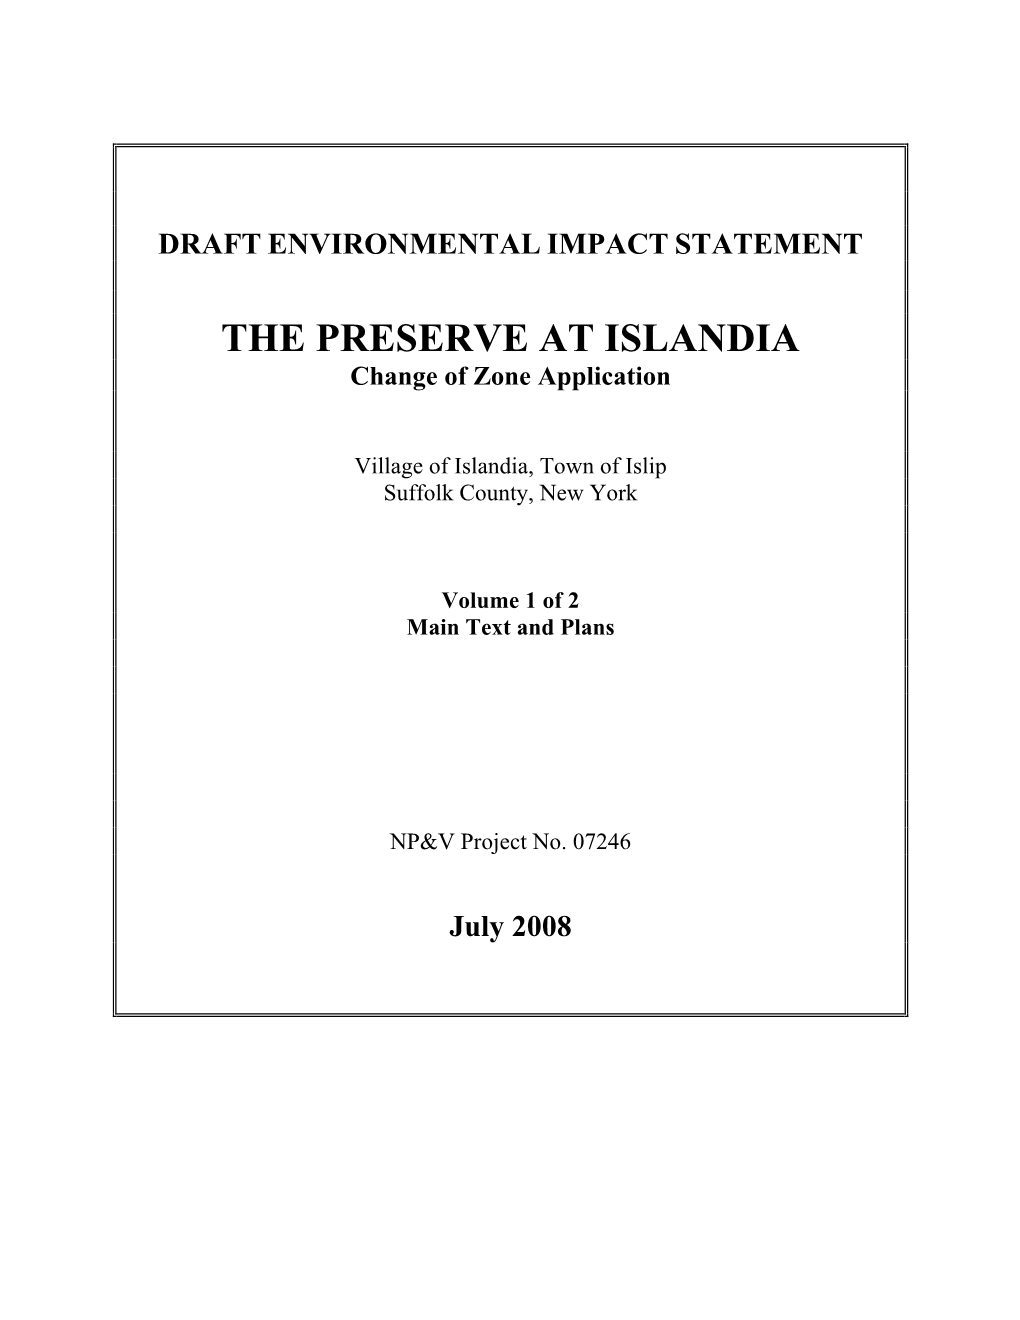 THE PRESERVE at ISLANDIA Change of Zone Application